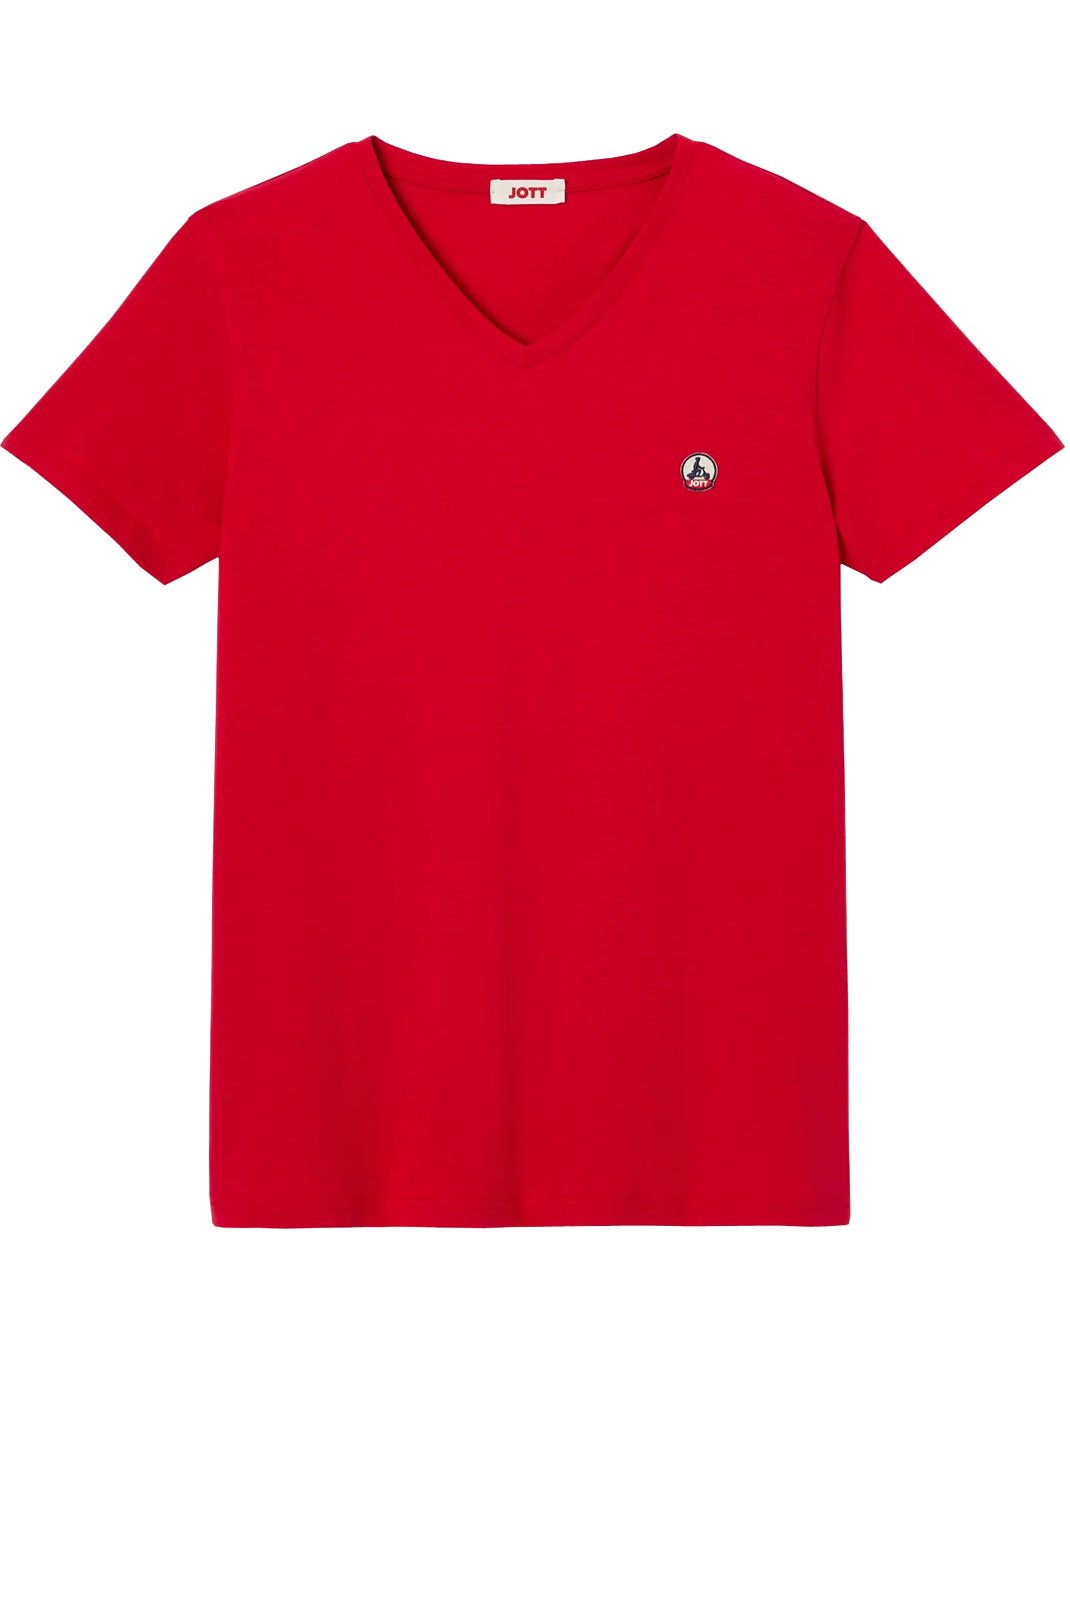 Tee-shirts  Just over the top BENITO 300 RED